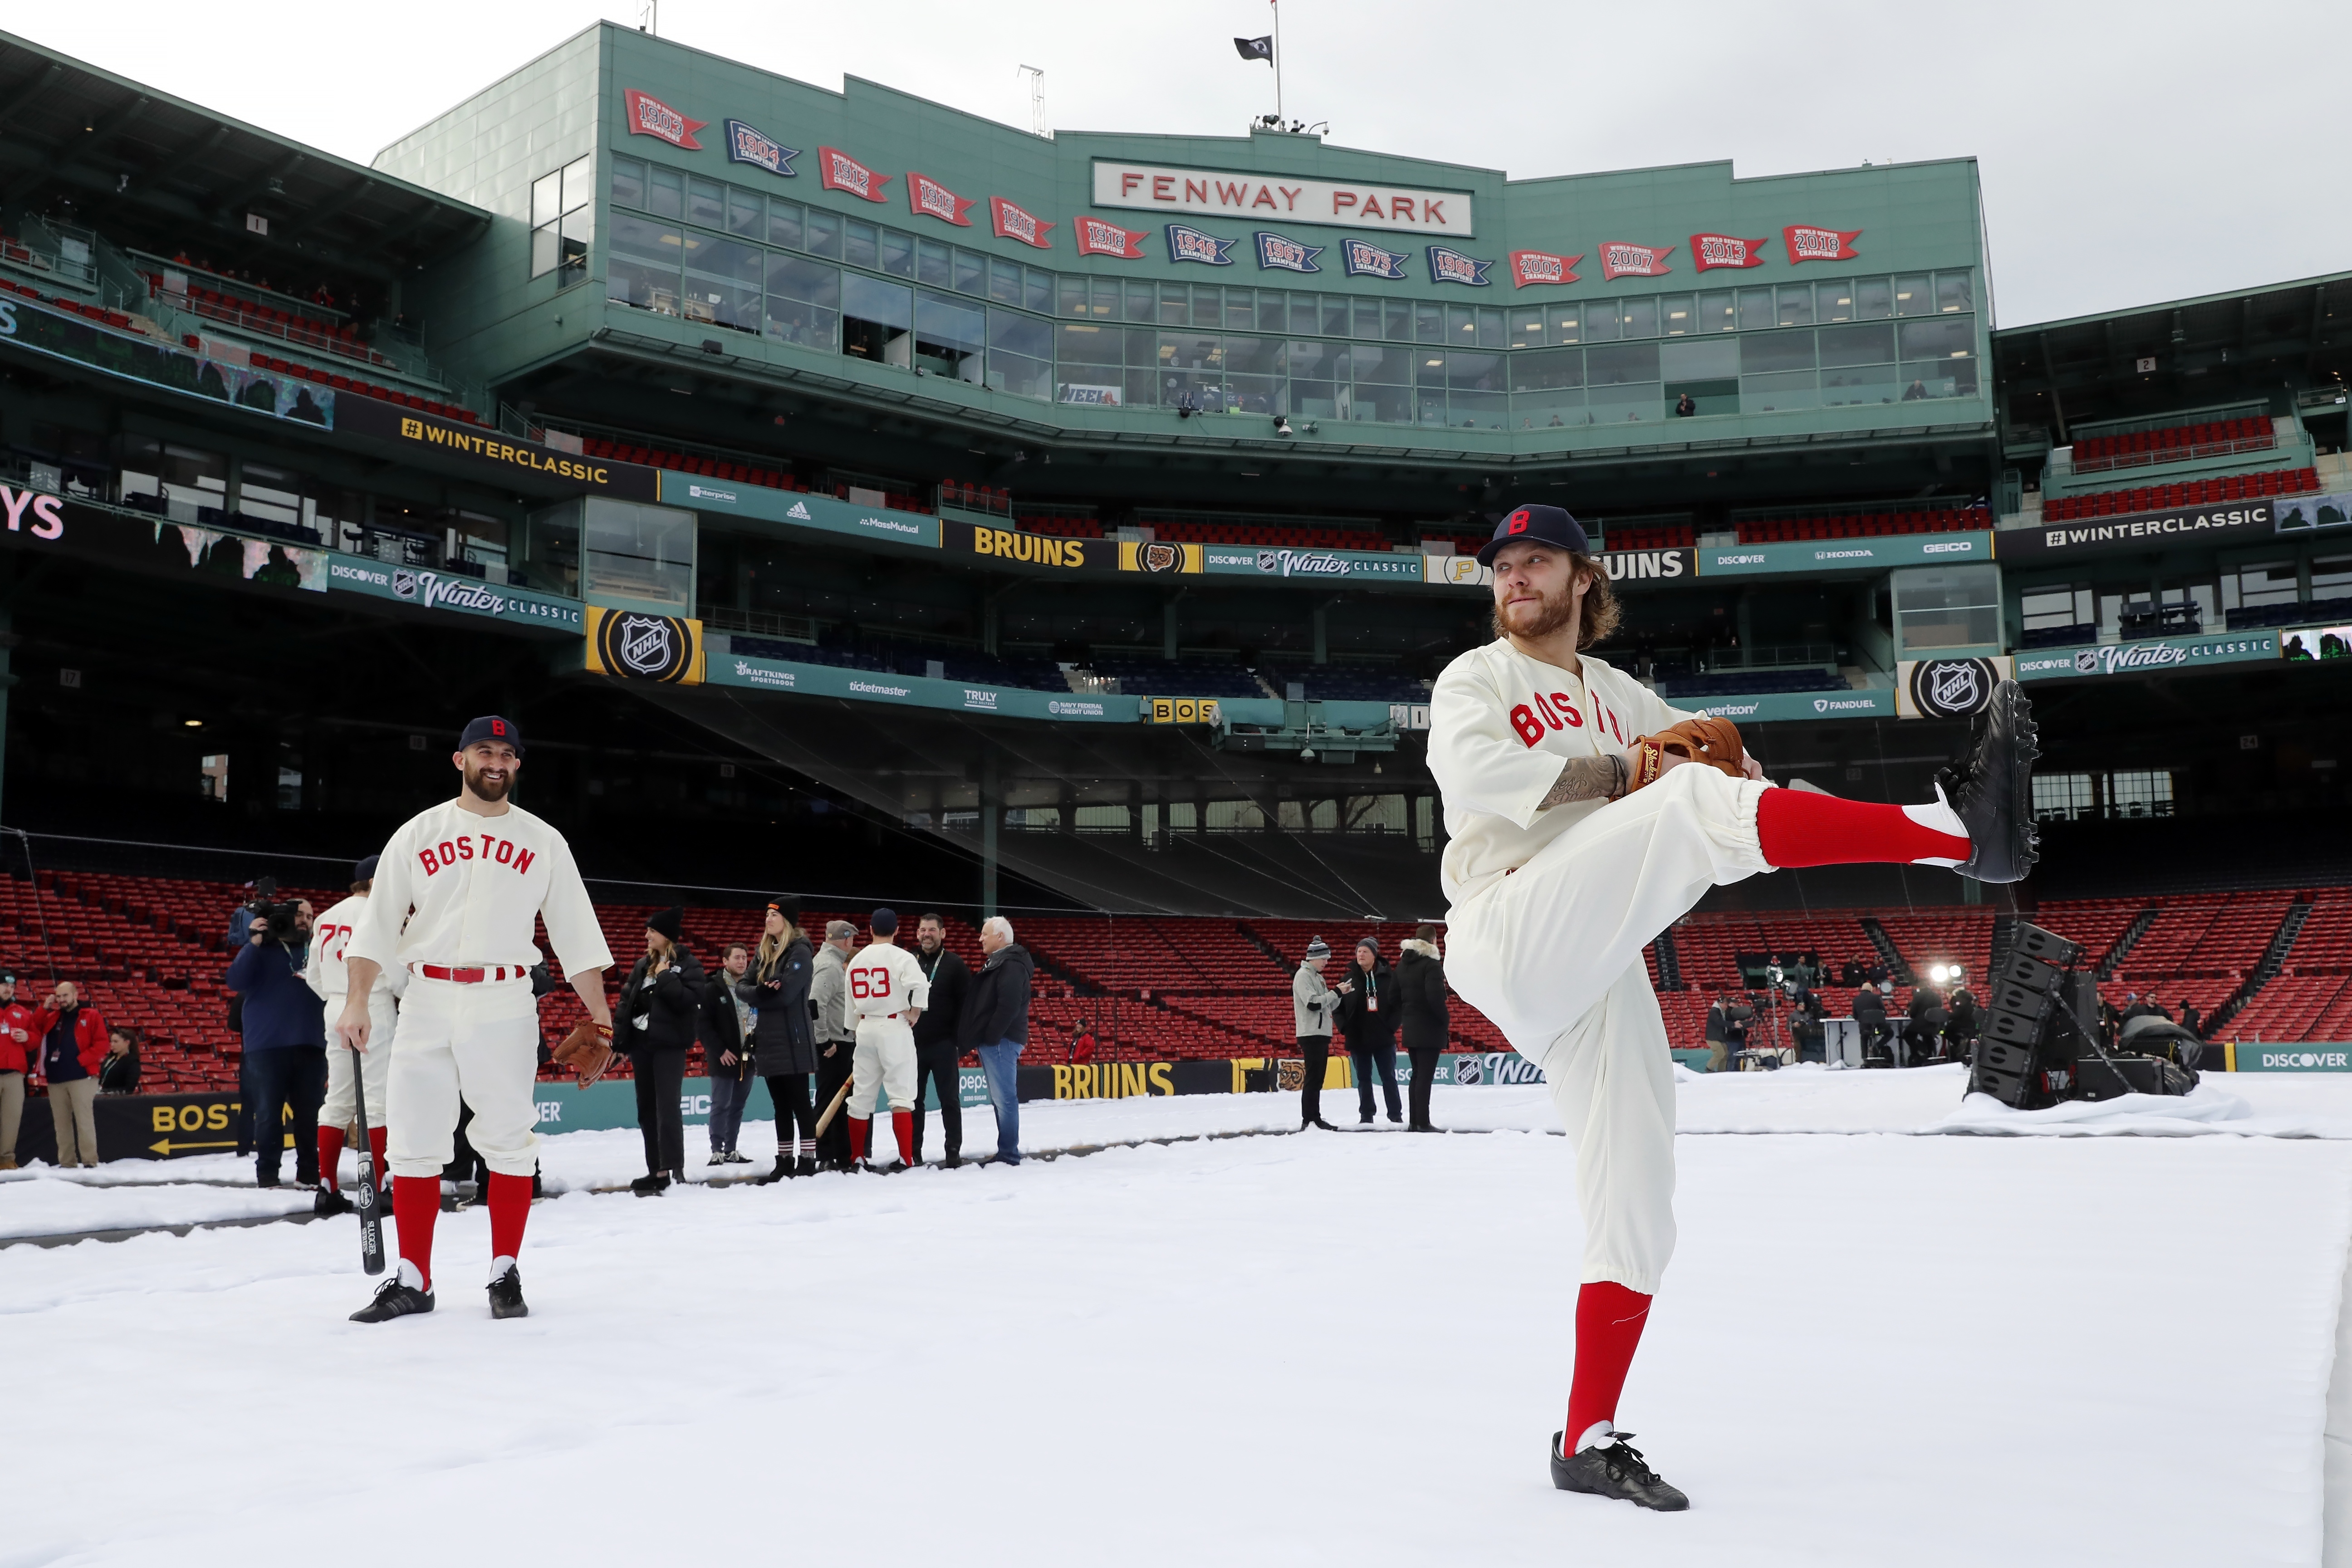 Bruins pull up to Winter Classic in retro Red Sox uniform